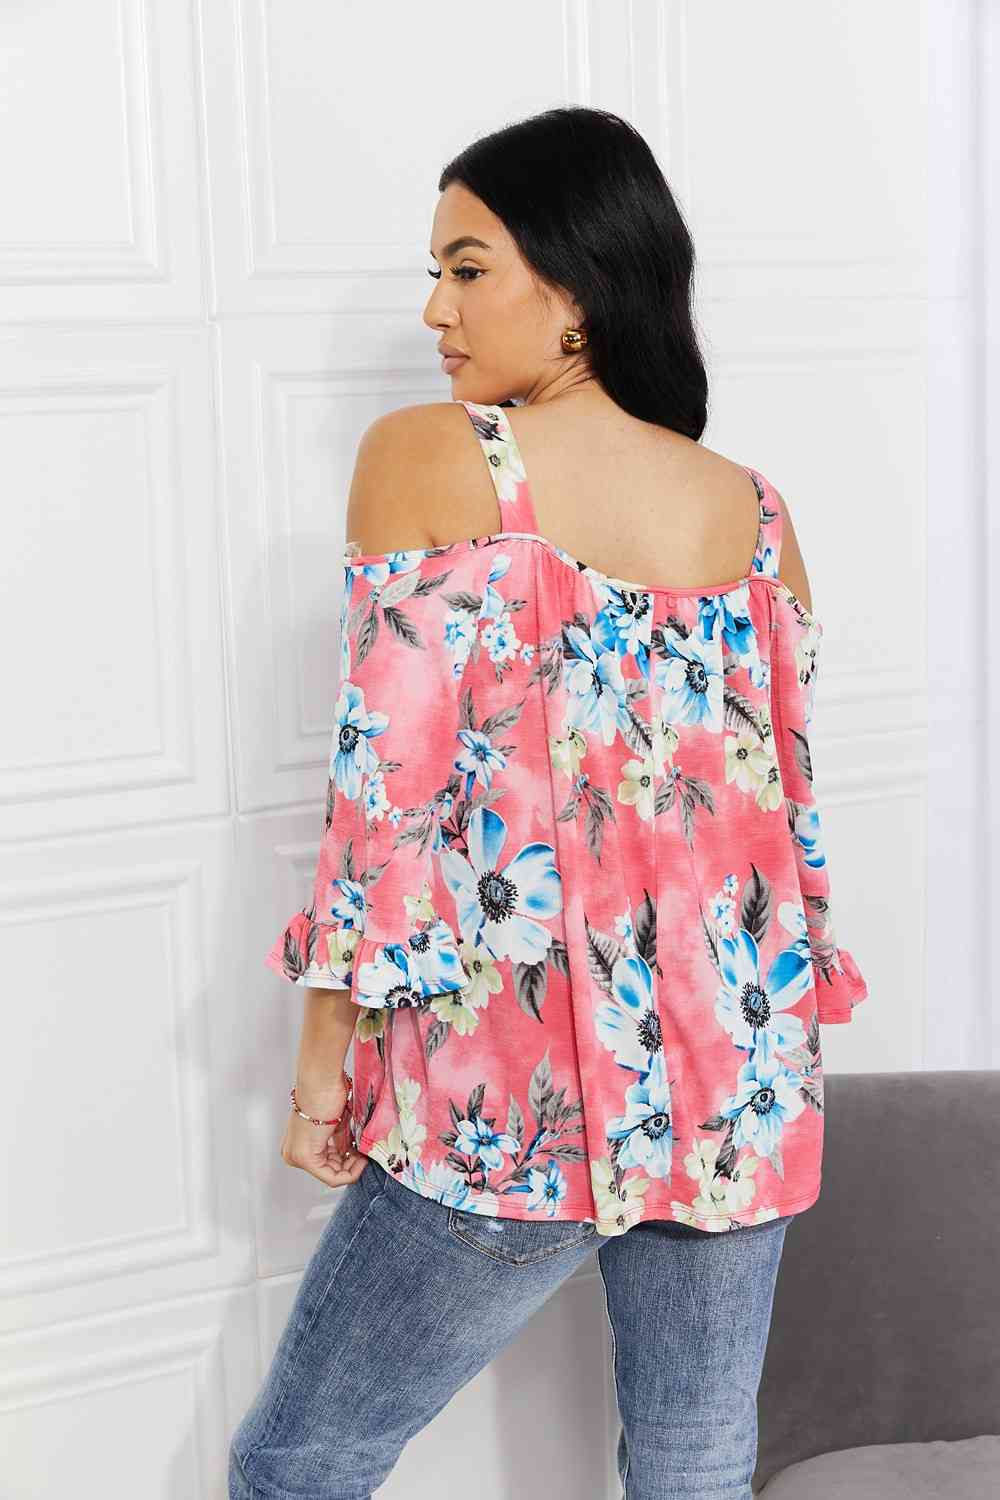 Fresh Take Floral Cold-Shoulder Top - Women’s Clothing & Accessories - Shirts & Tops - 8 - 2024